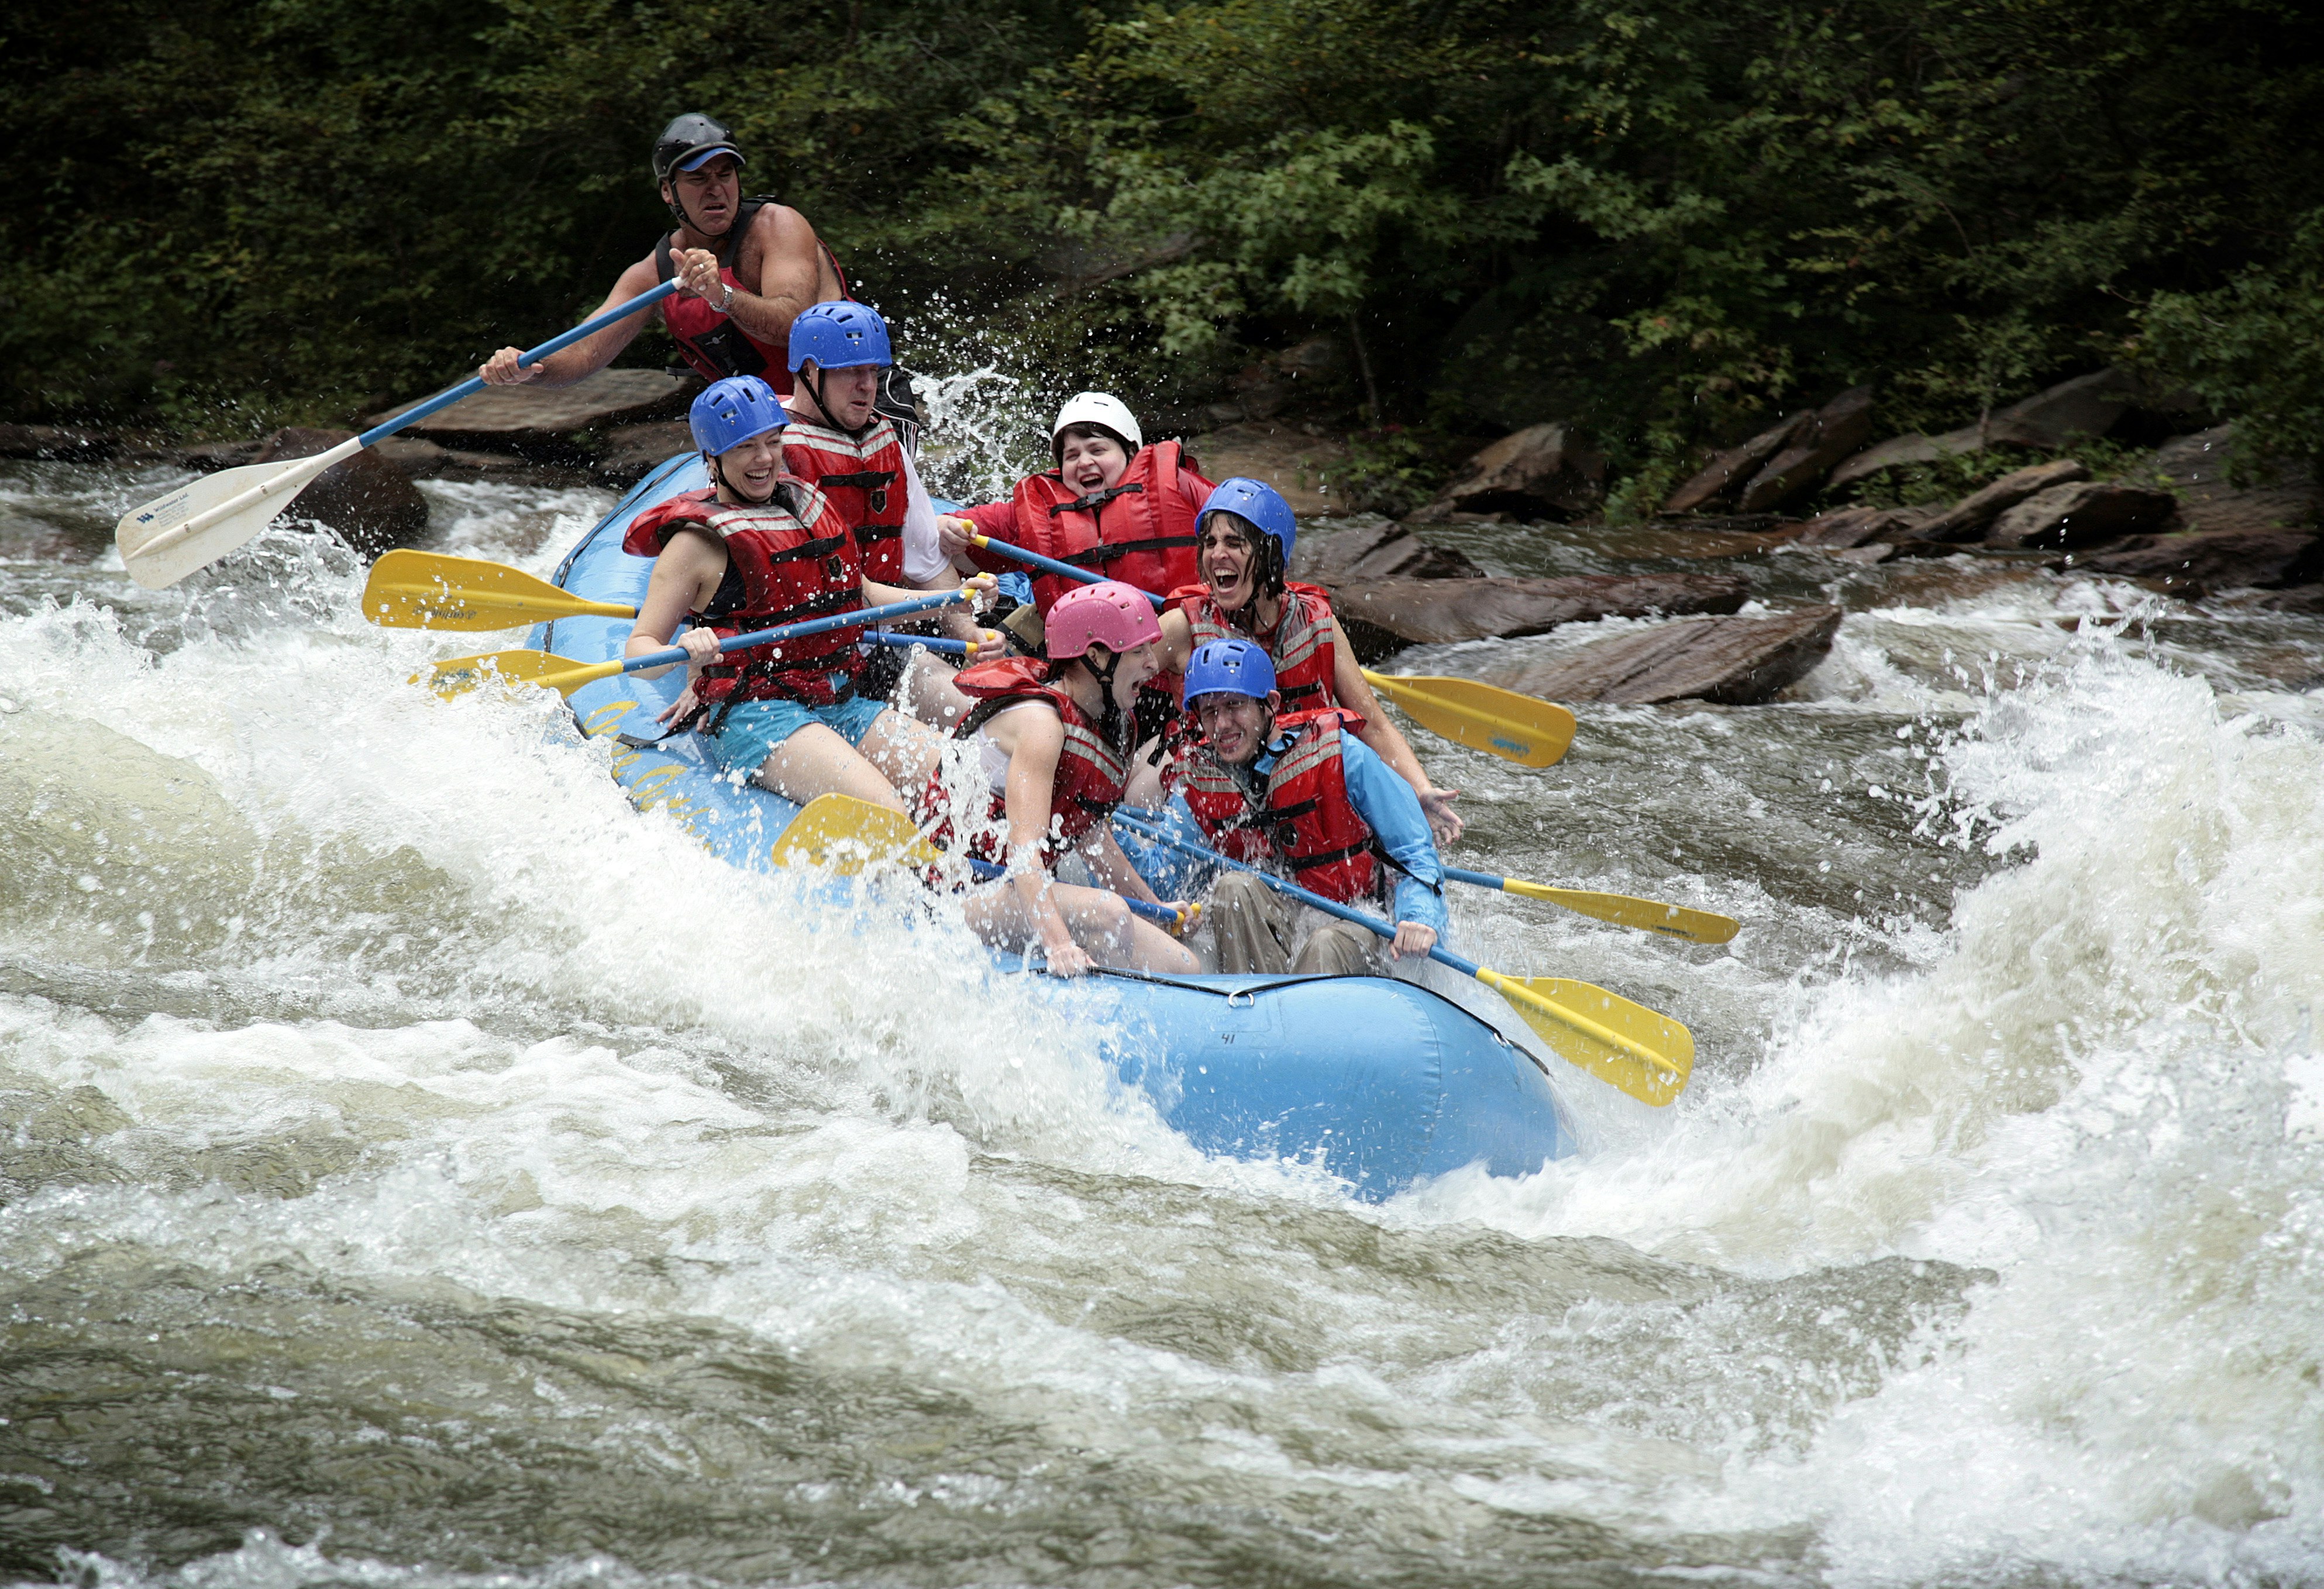 A group of people wearing helmets and life jackets smile as they white-water raft at the Ocoee Whitewater Center